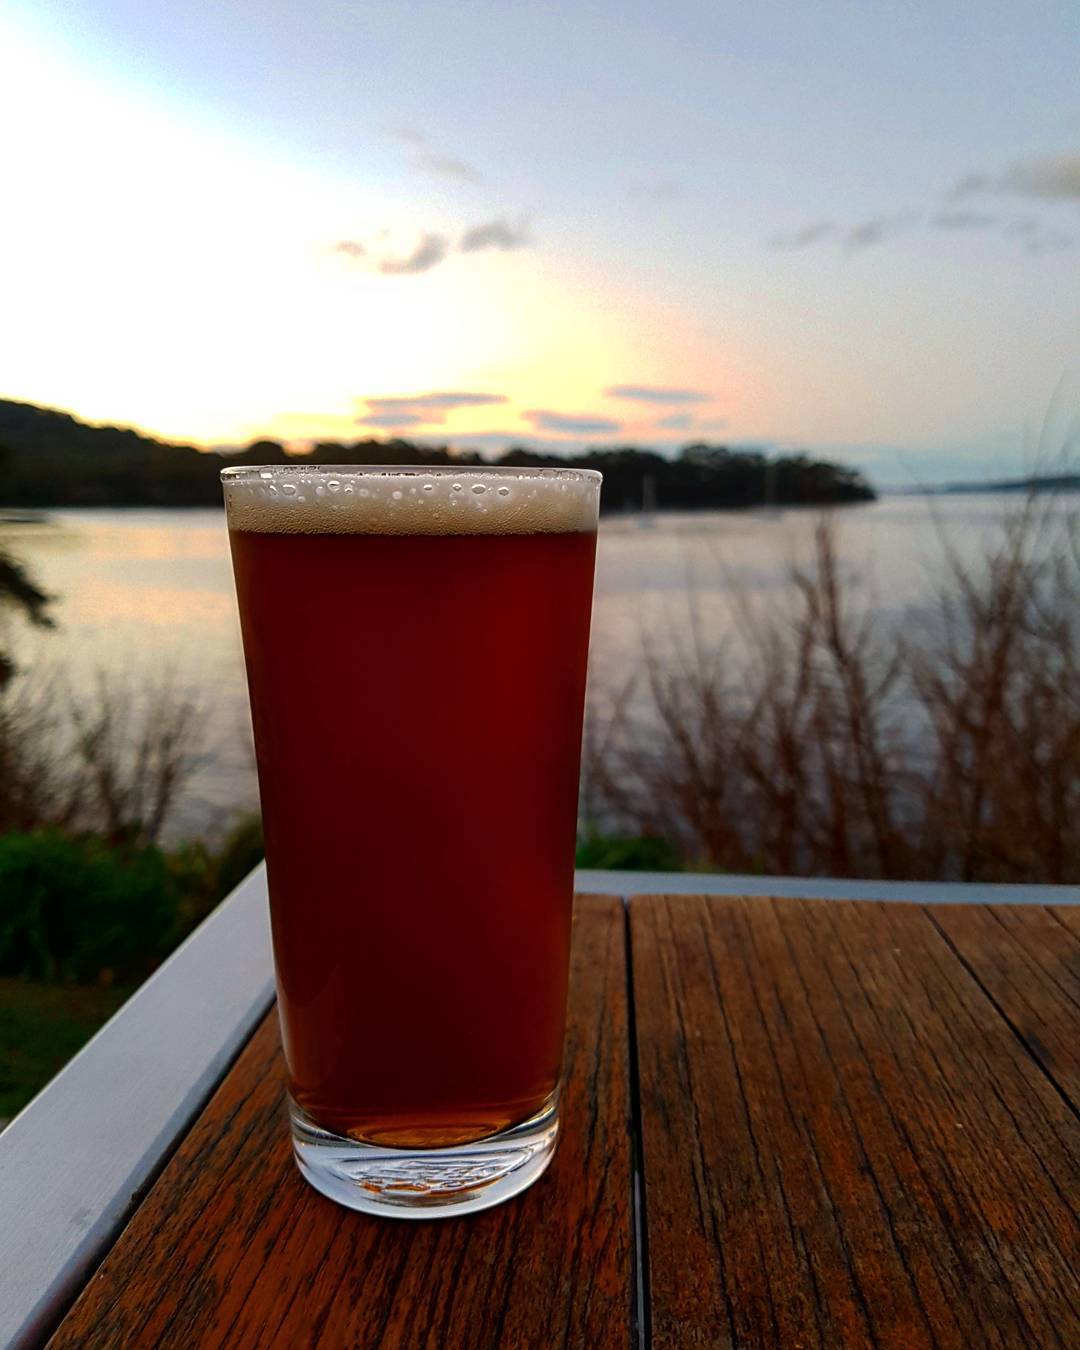 Come and enjoy a glass of our newest beer on tap. The “Anekke Red Ale” from Captain Bligh’s brewing company is a perfect accompaniment to be enjoyed with our veiw of the Channel! ?: @_tomsandy #tasbeer #beer #tasmania #captainblighs #redale #woodbridge